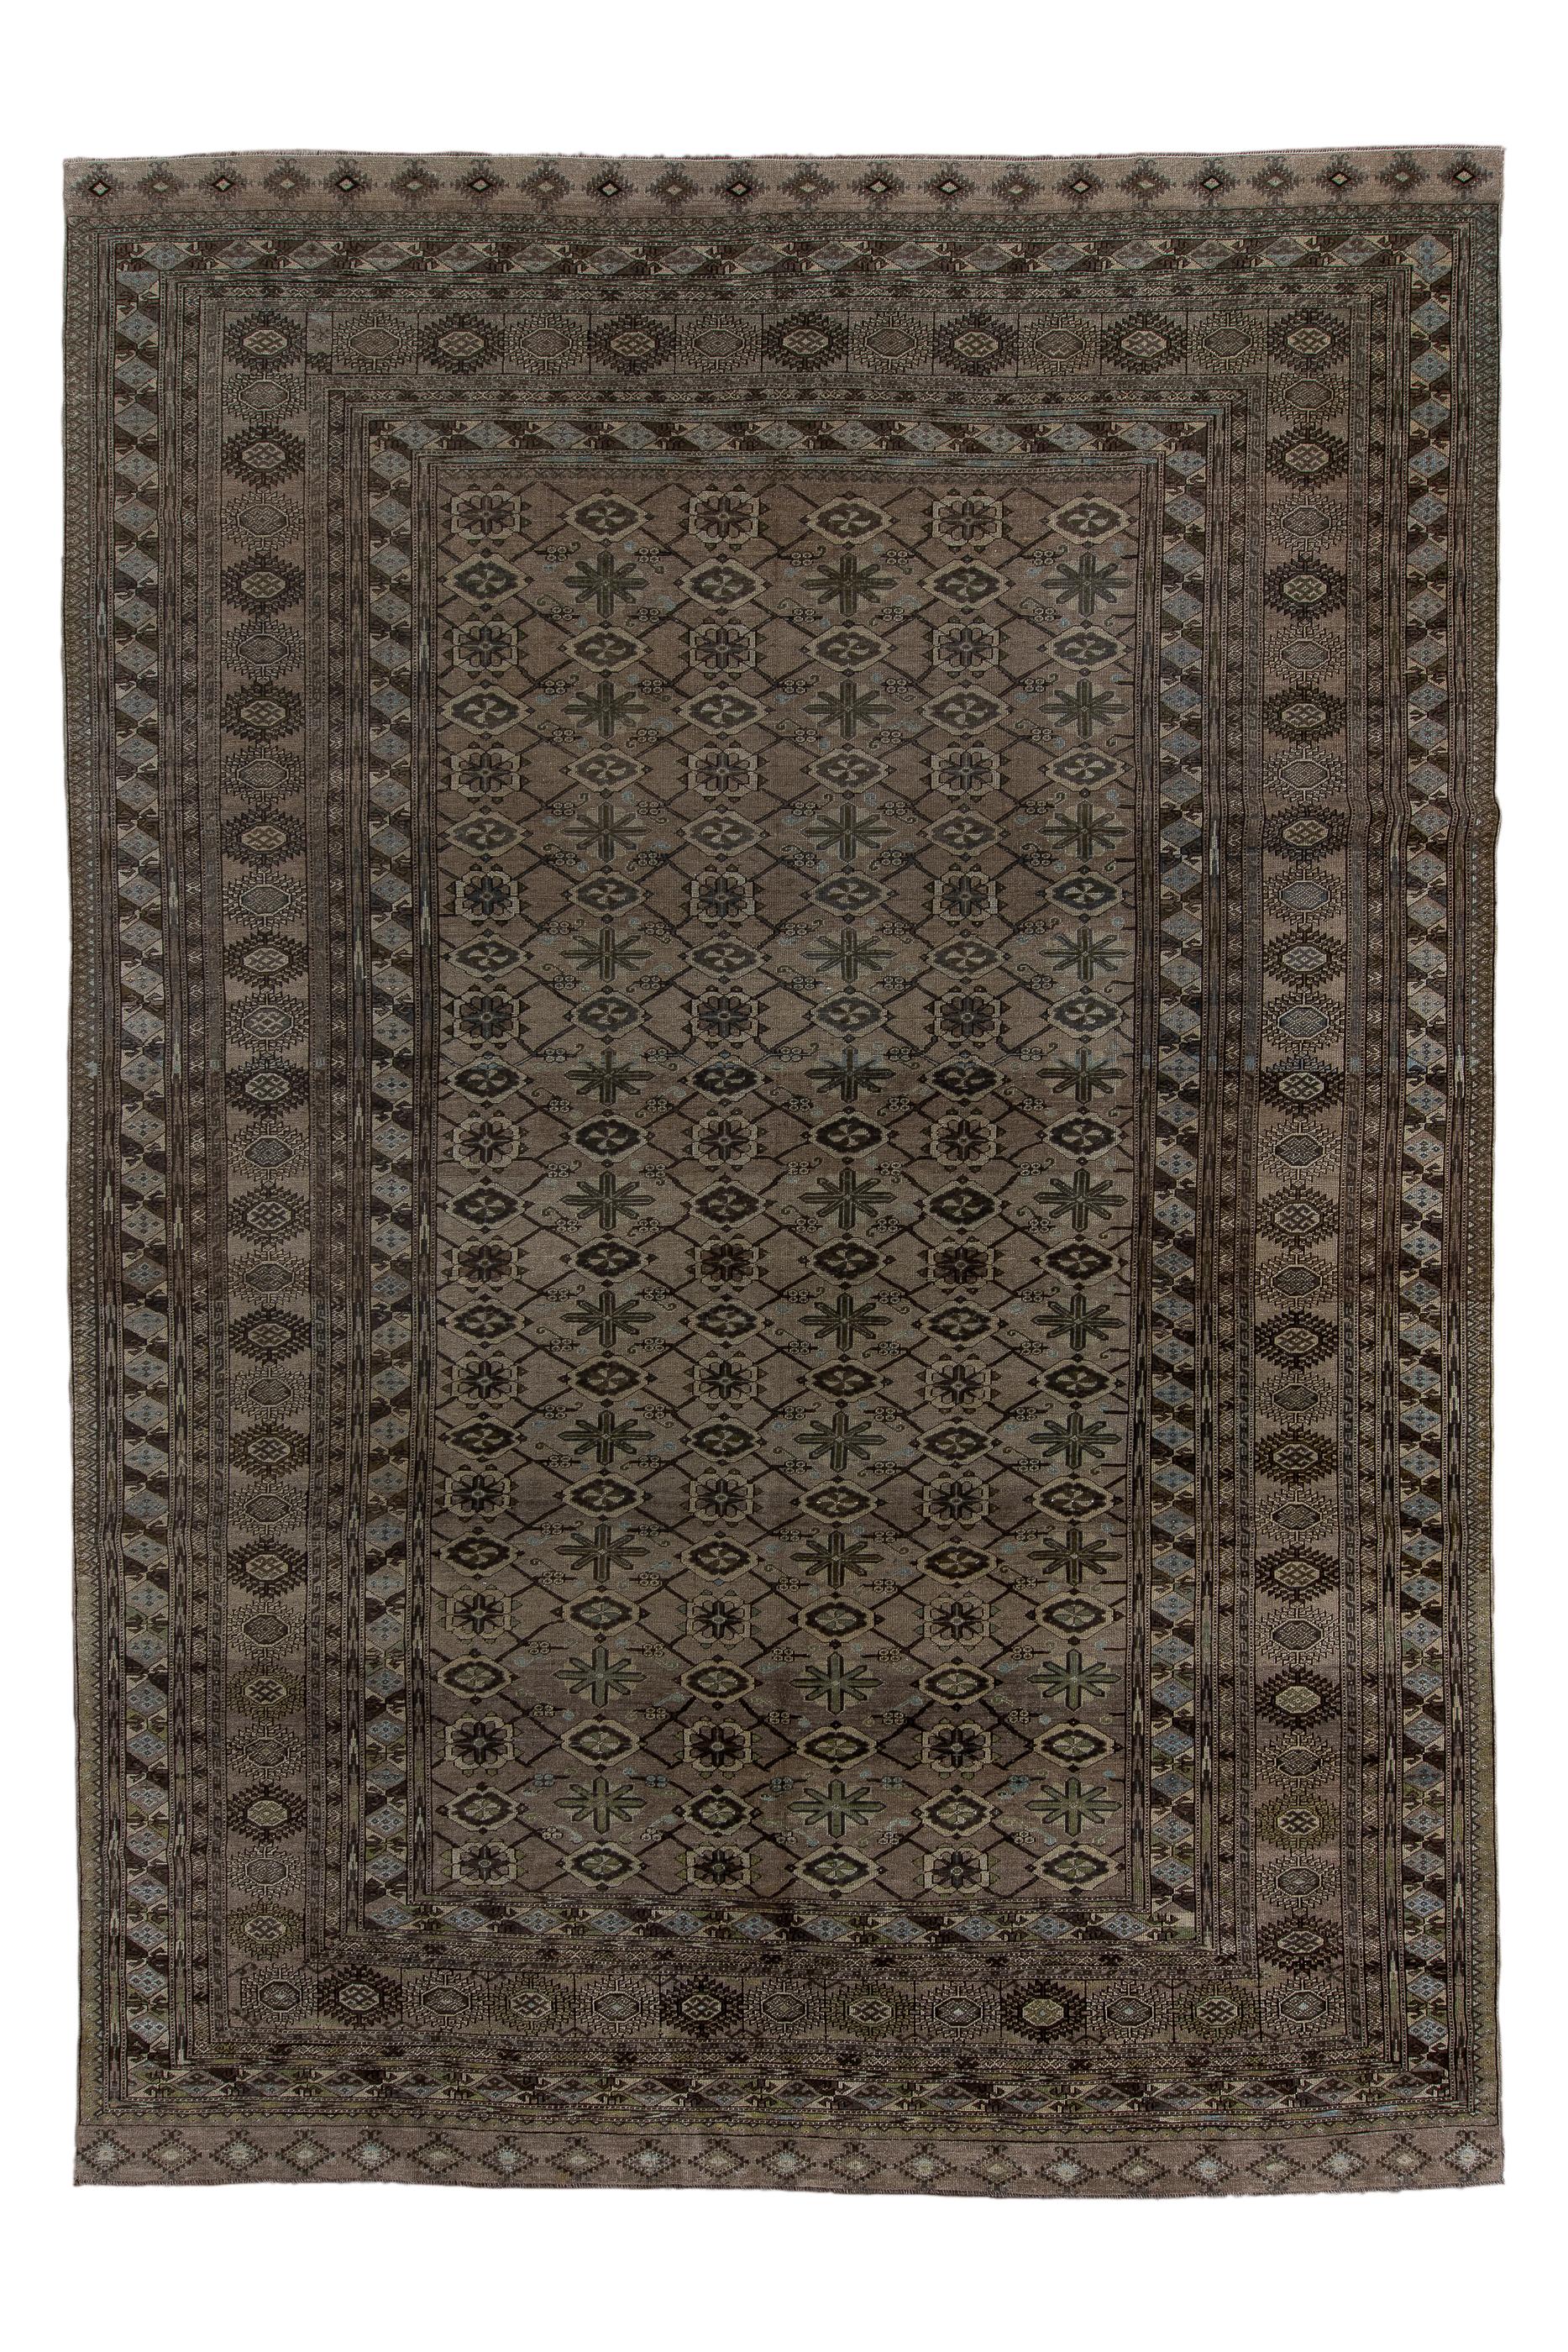 The lighter red-brown field shows a geometric version of the Mina Khani rosette lattice, enframed by a wide border system including a central Tekke-Turkmen-style surround of rayed  hexagons.  Other Turkmen-mode borders include patternings of tuning